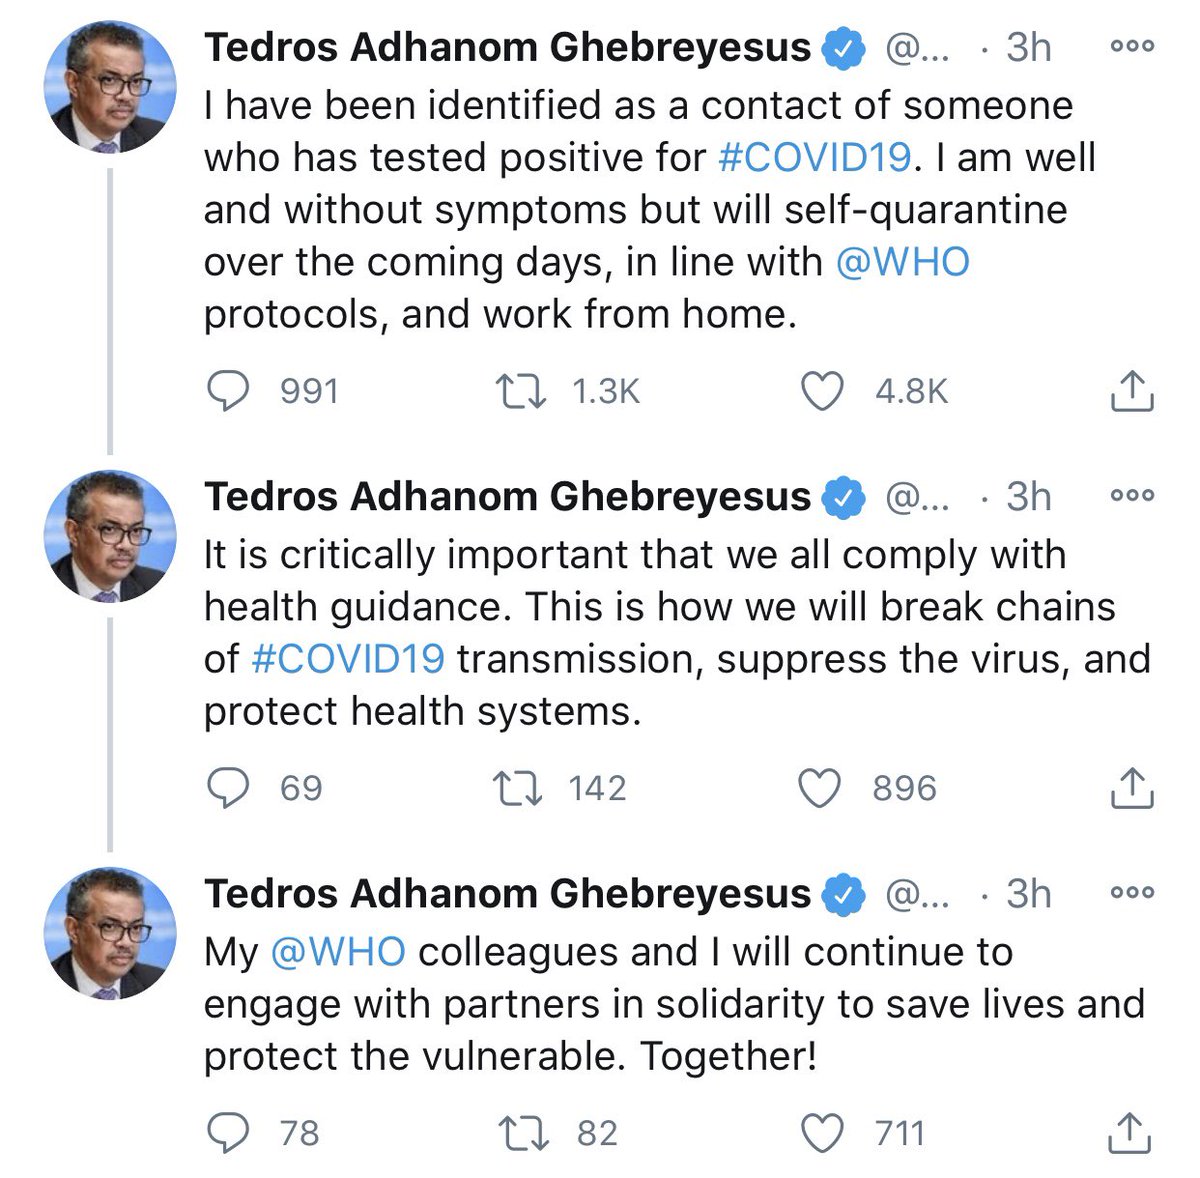 Wish Dr. Tedros well and stay strong. Virus knows no boundaries but is defeatable with us standing together. The world thanks and needs you. @WHO #TedrosAdhanomGhebreyesus #COVID19